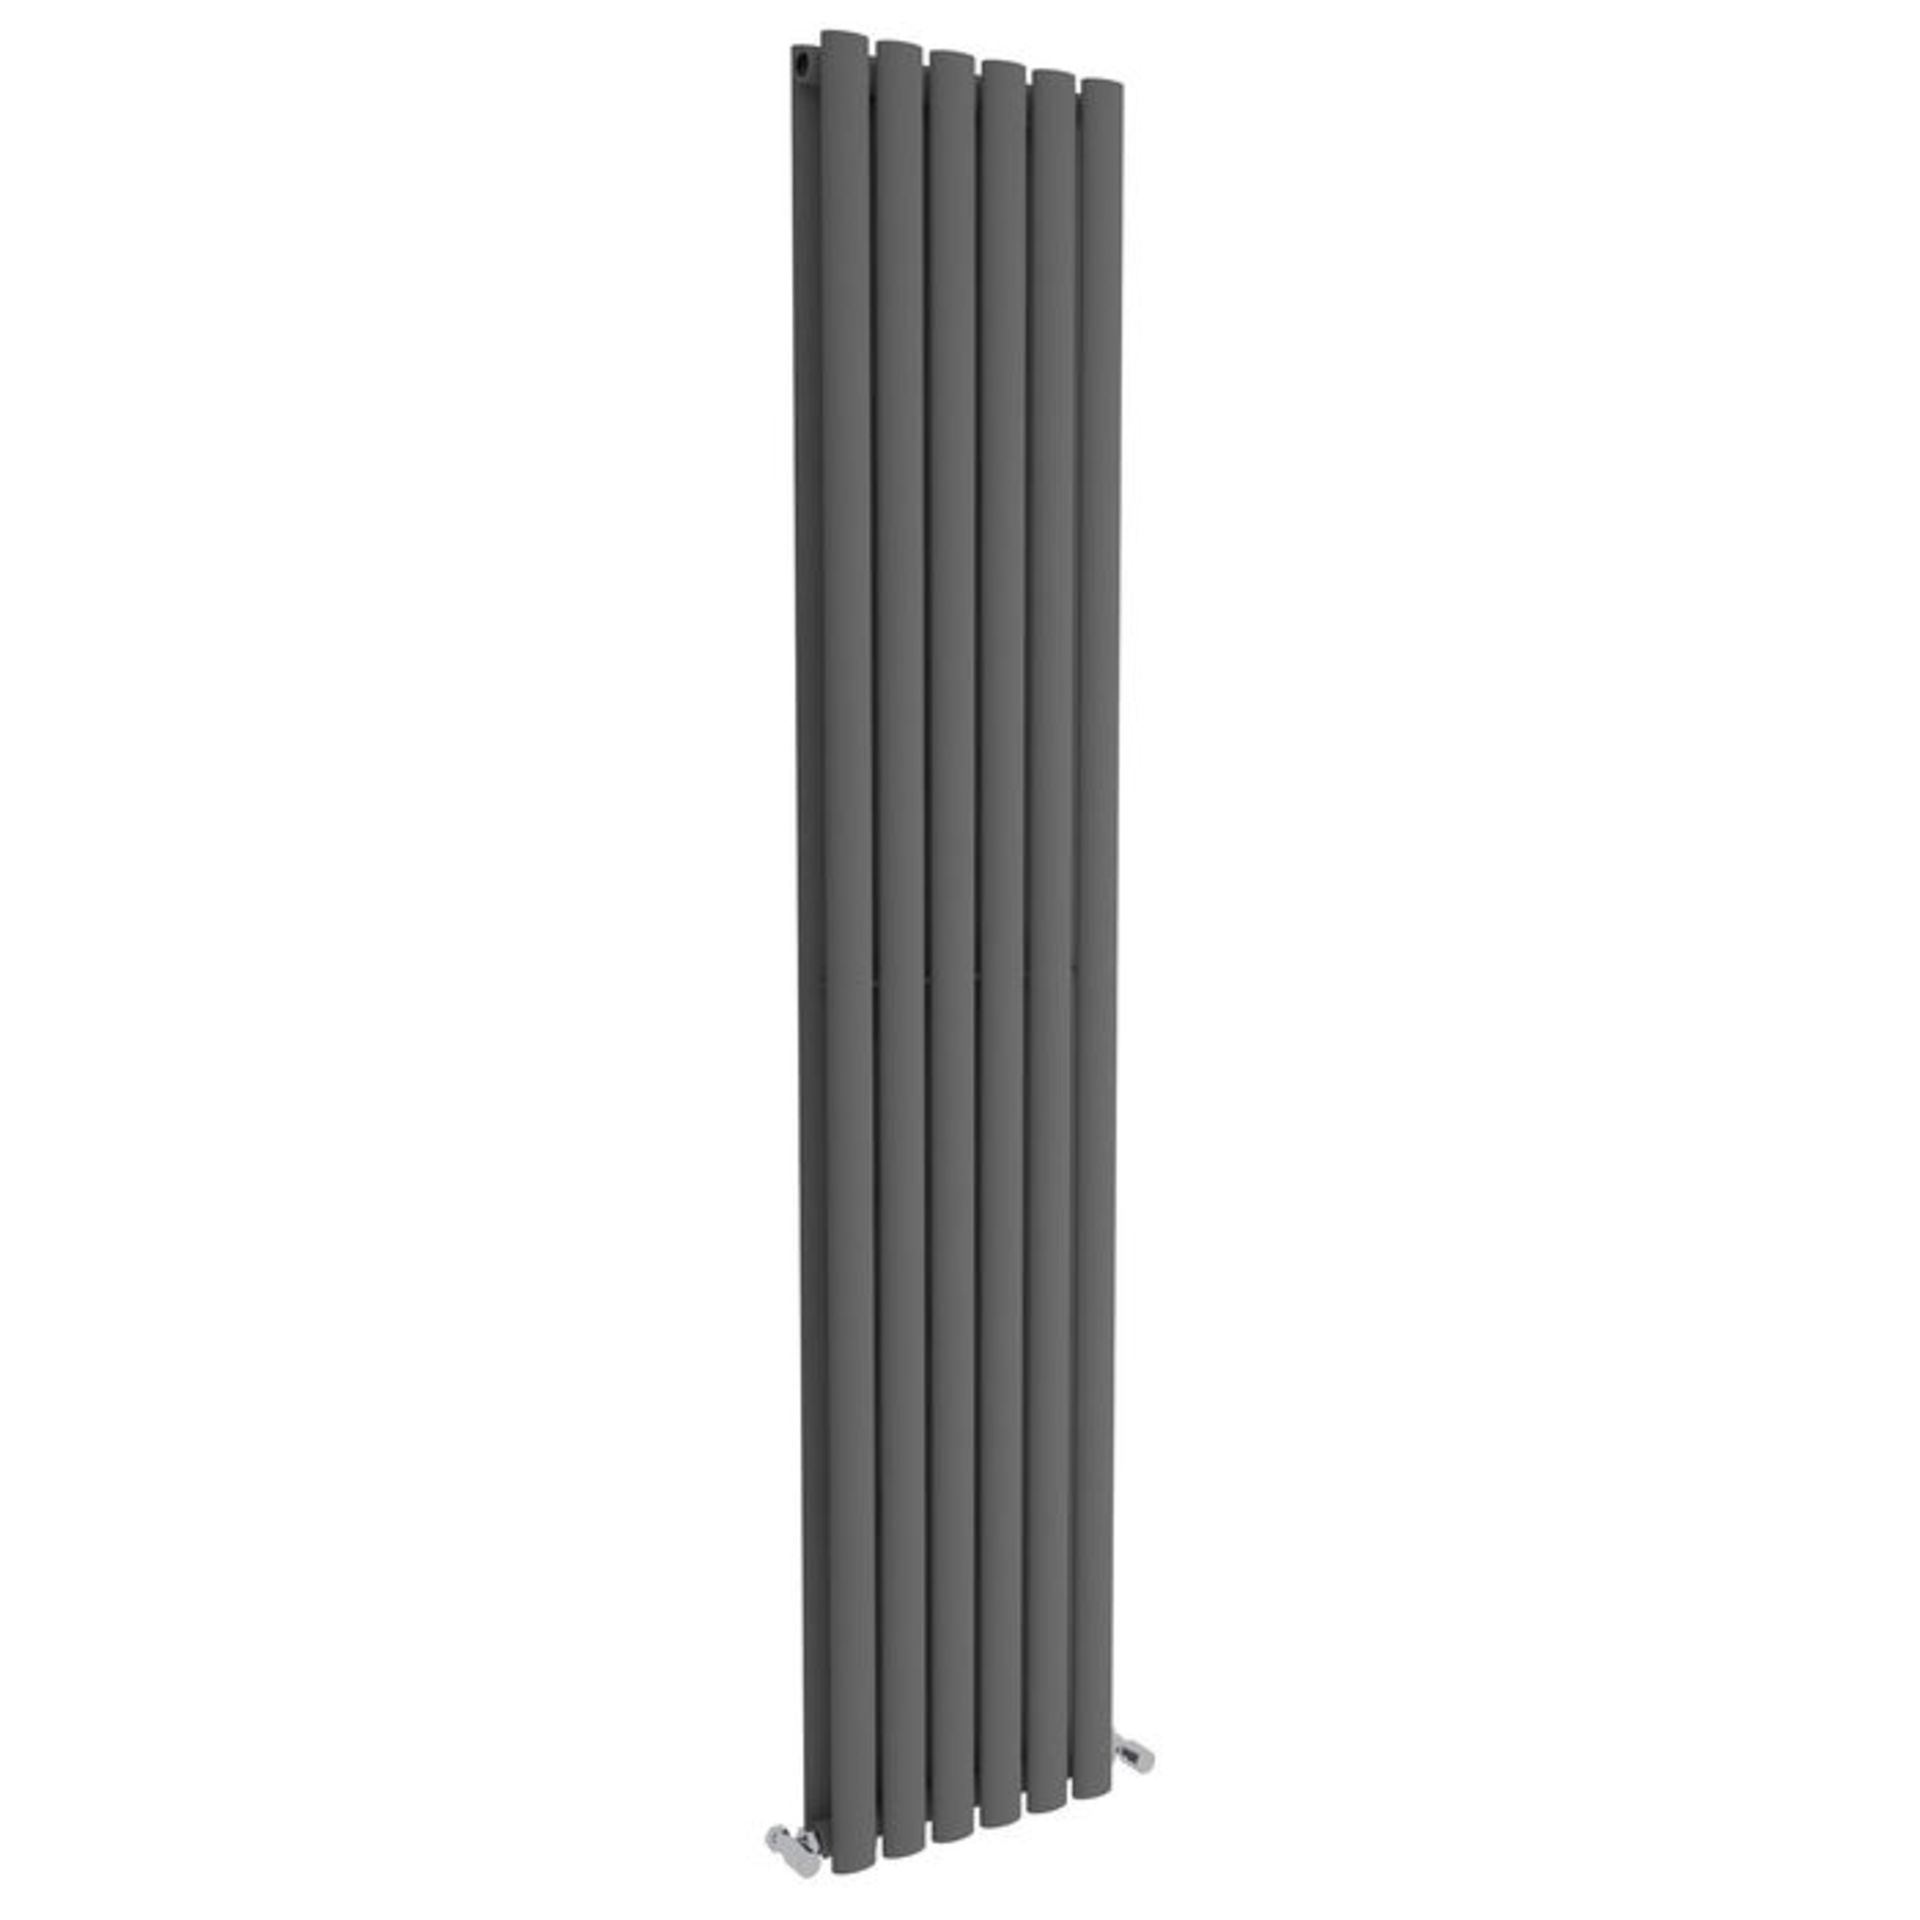 1800x360mm Anthracite Double Oval Tube Vertical Radiator. RRP £344.99. Made from high quality ... - Image 3 of 3